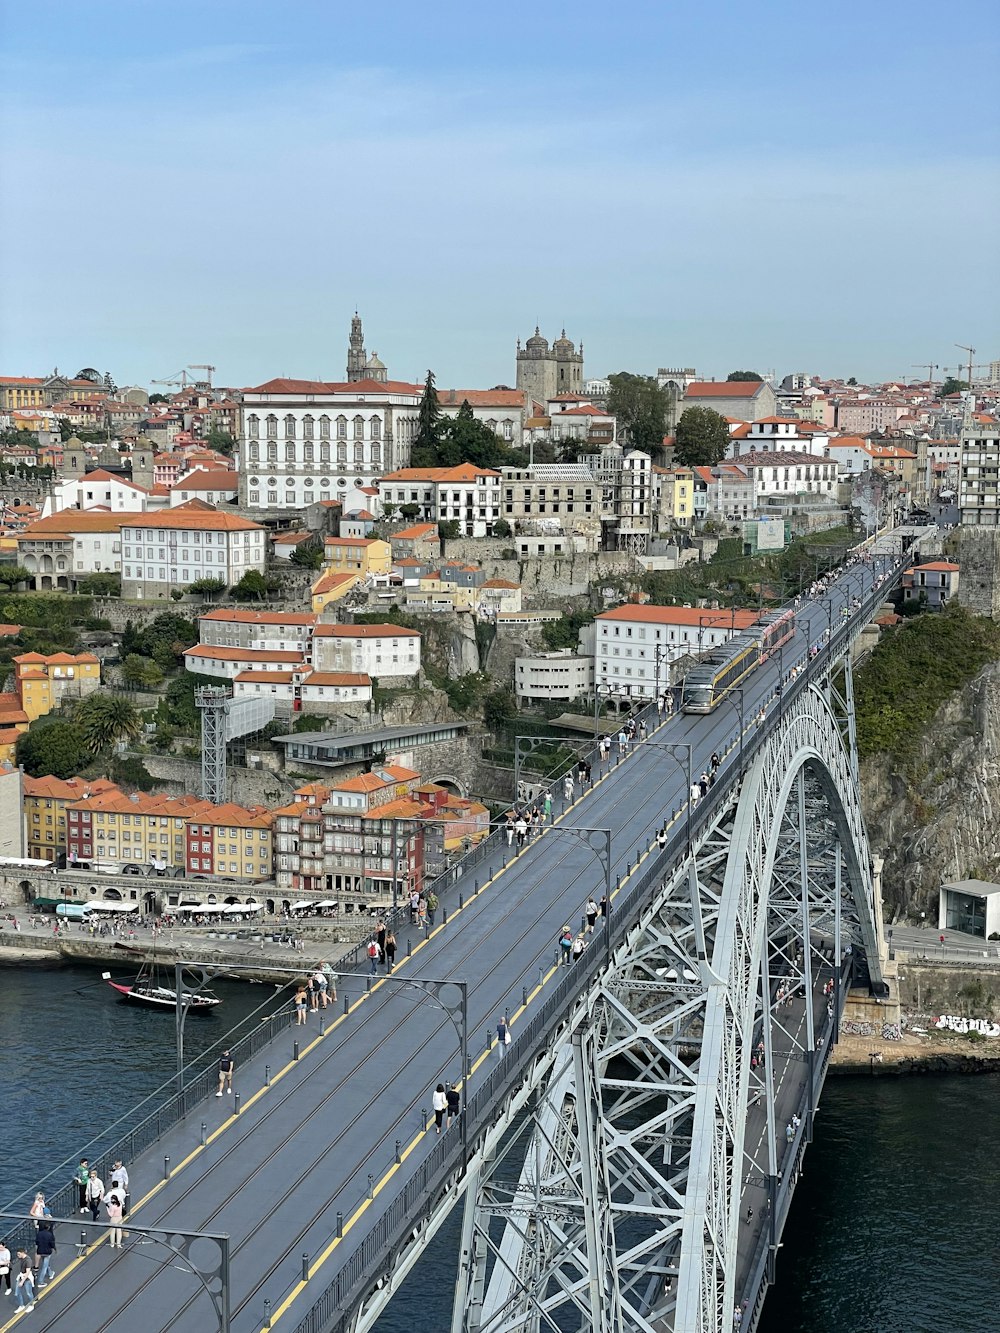 a bridge over a body of water with a city in the background